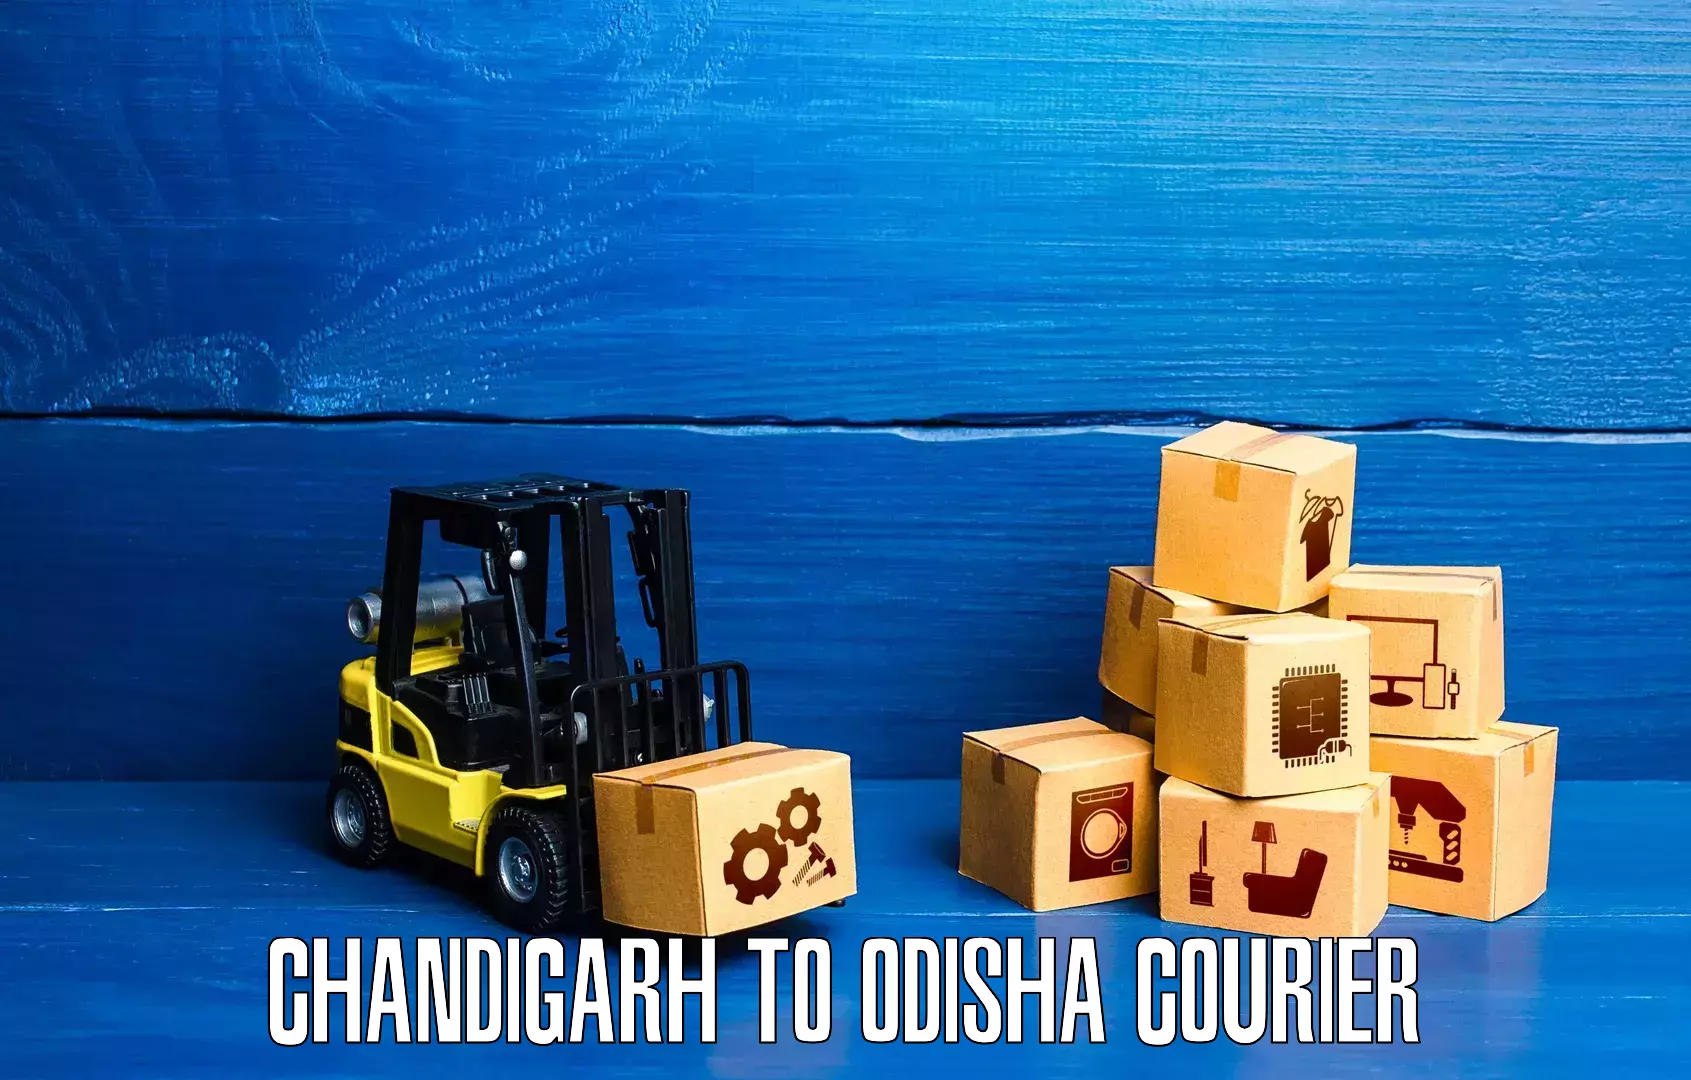 State-of-the-art courier technology Chandigarh to Loisingha